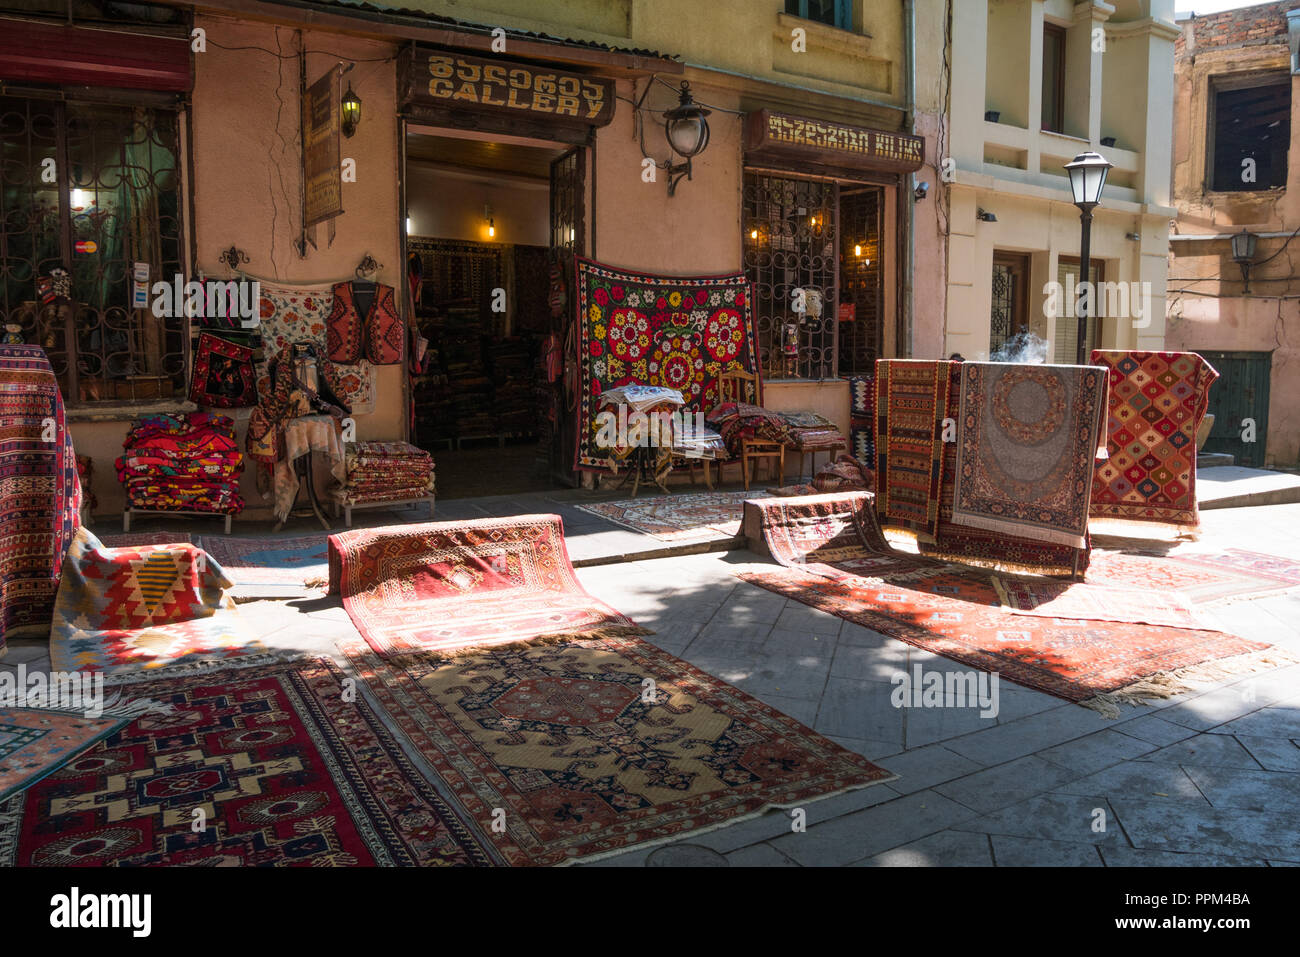 Rugs and carpets outside a gallery shop in Old Town, Tbilisi. Stock Photo